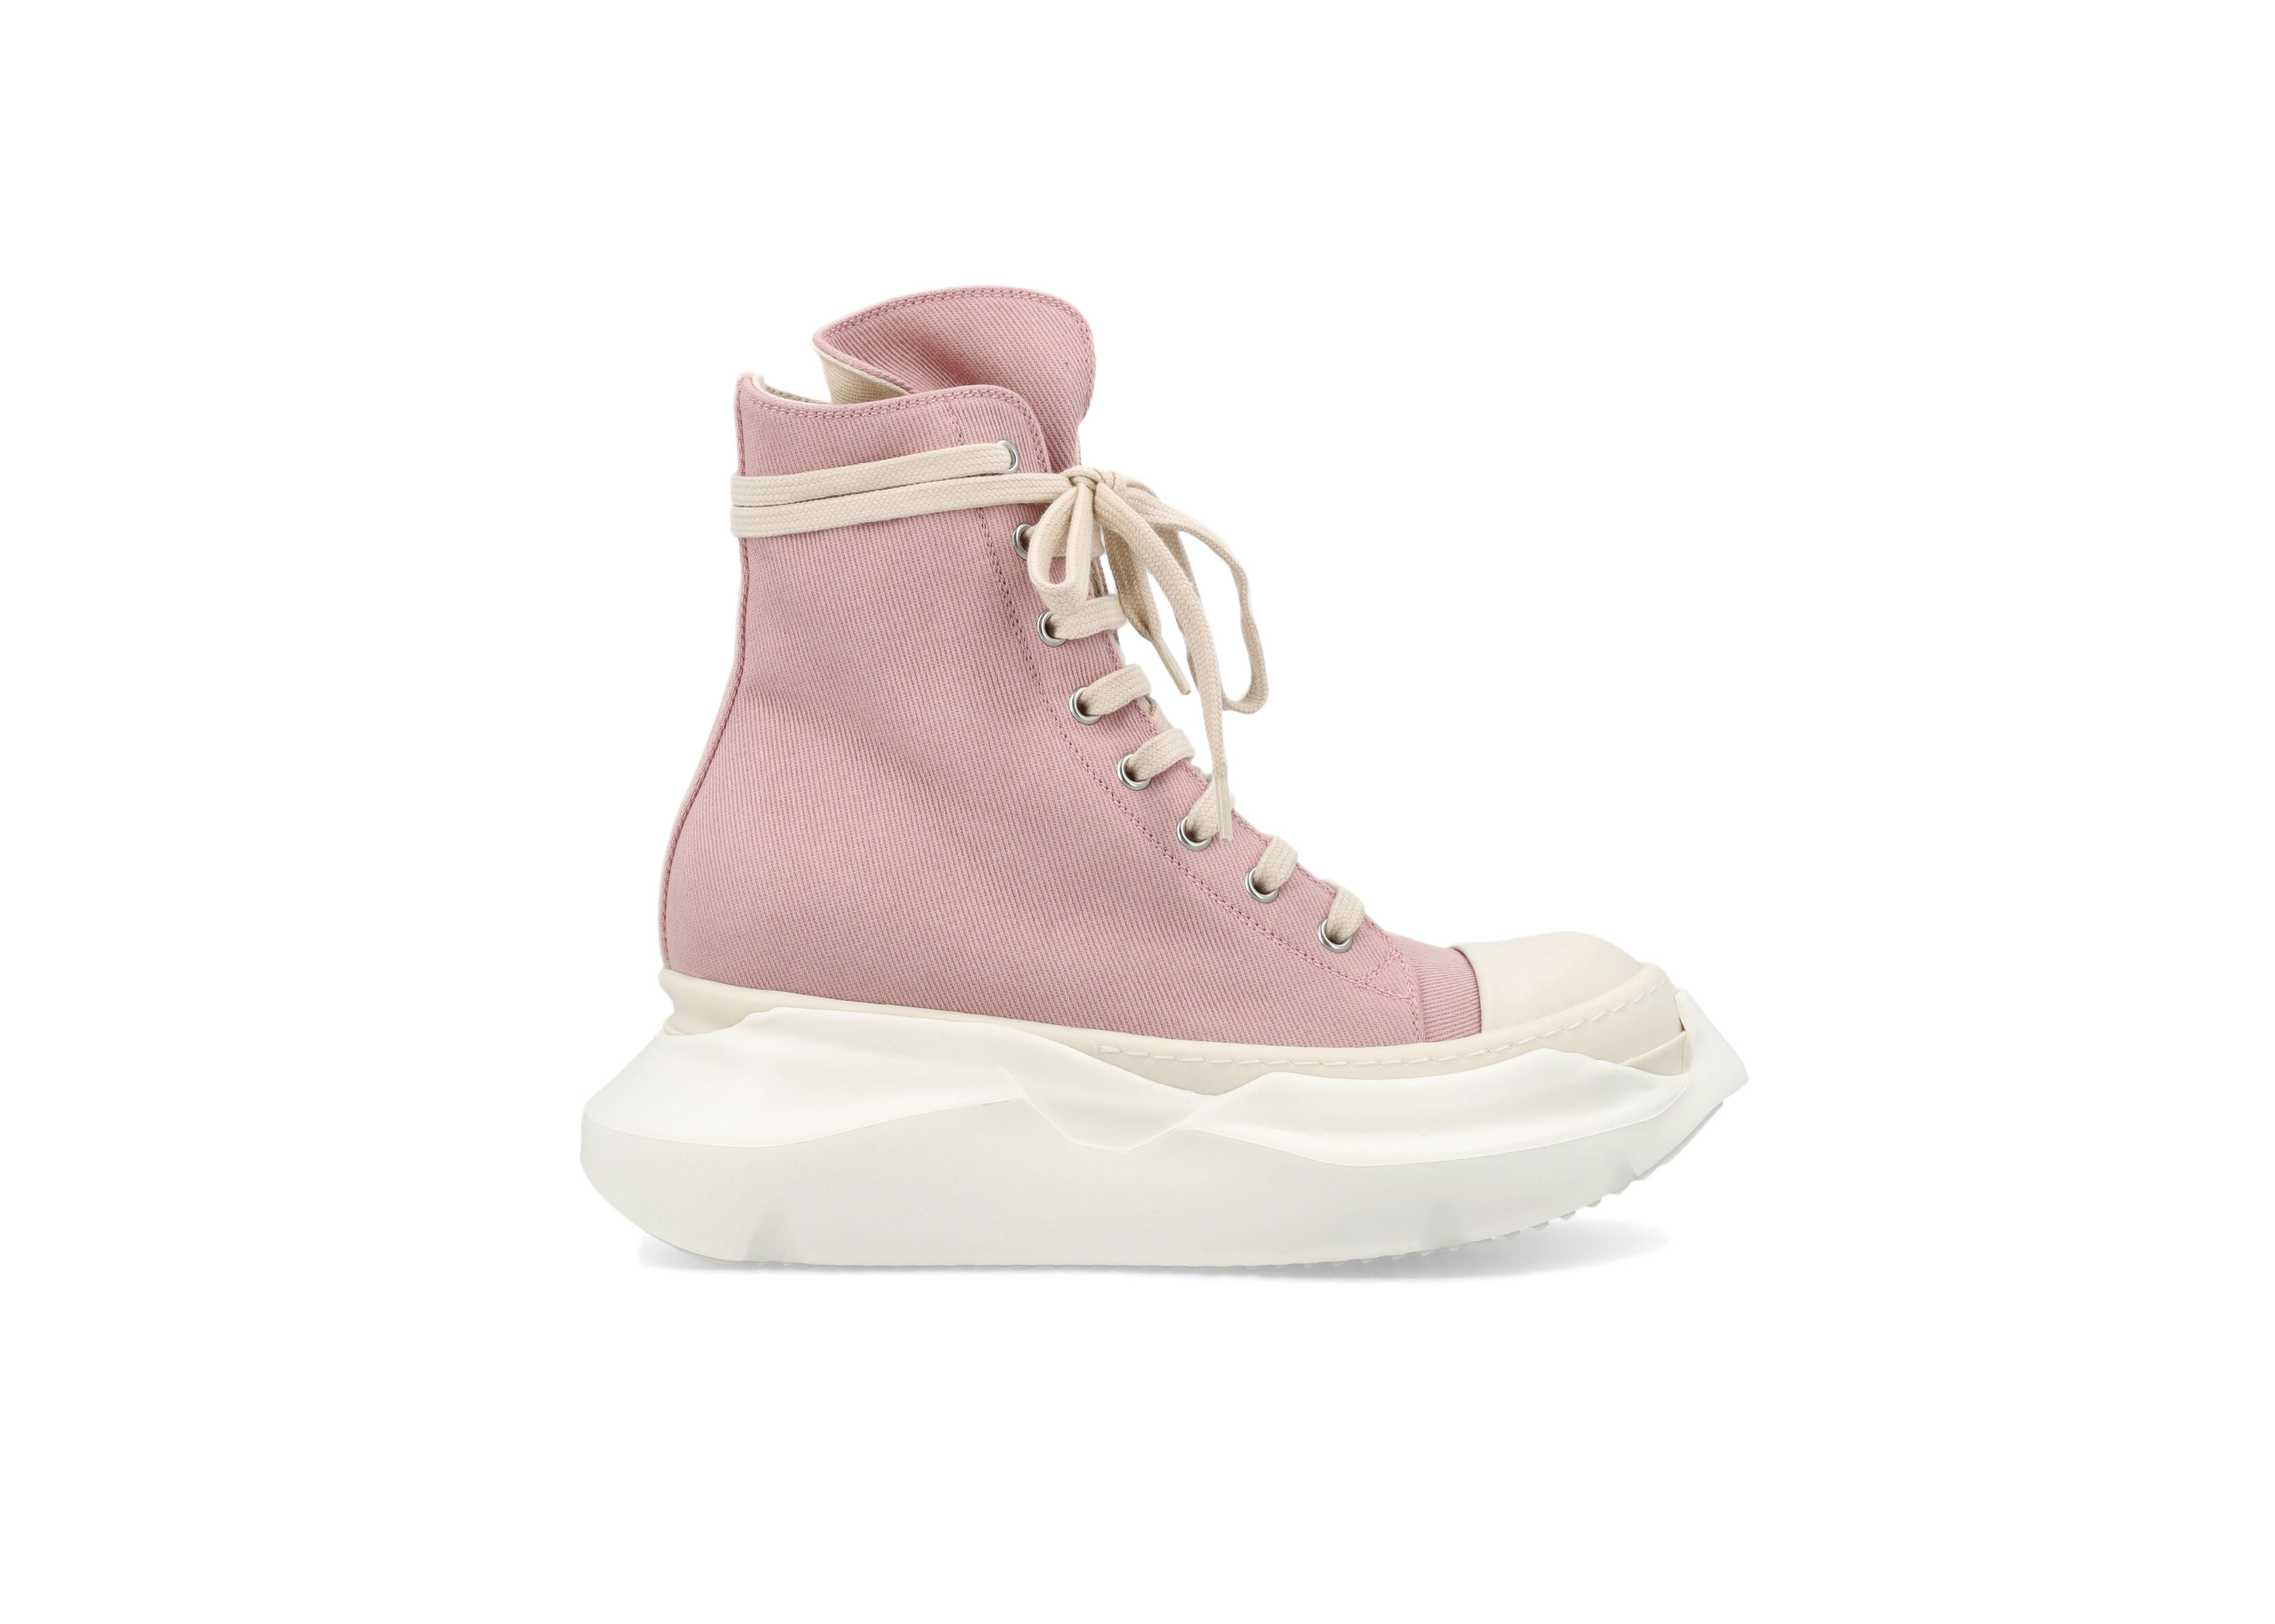 Rick Owens DRKSHDW Abstract High Top Faded Pink (Women's)